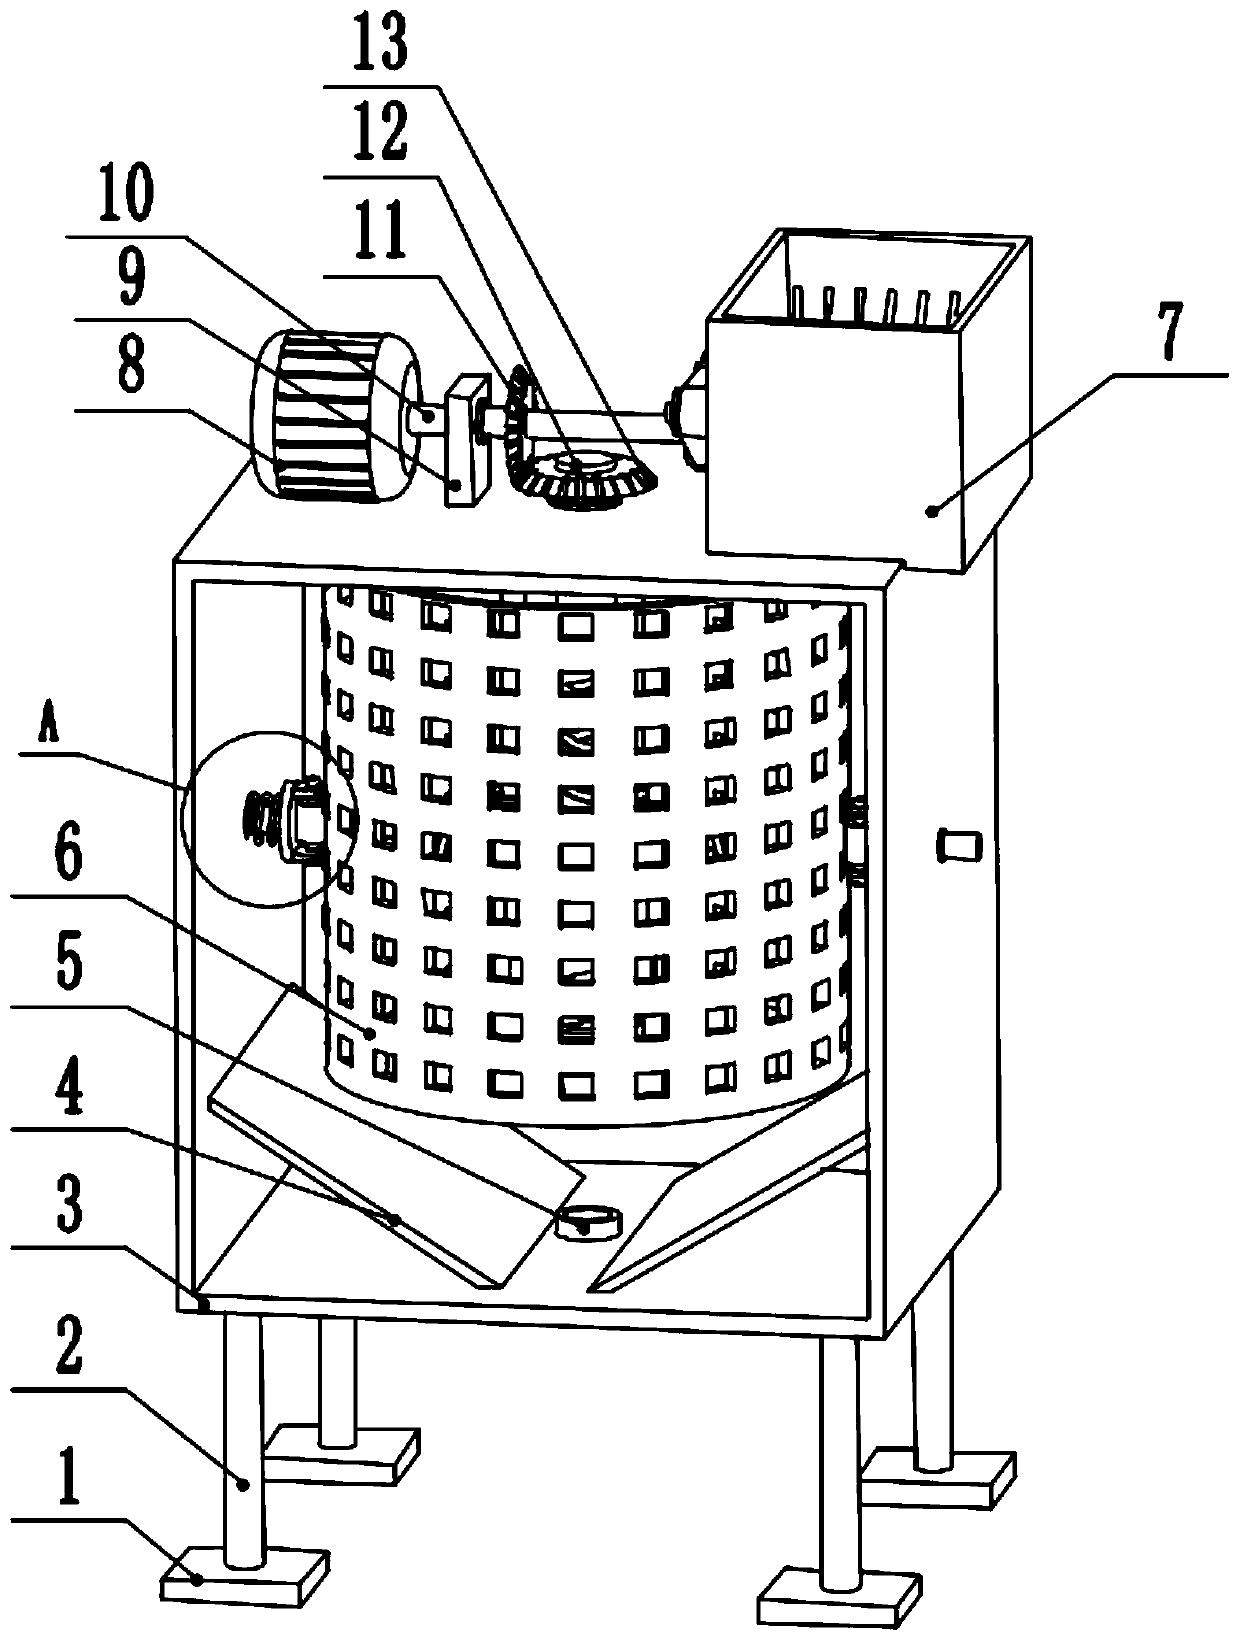 Petroleum extraction device for petroleum residues